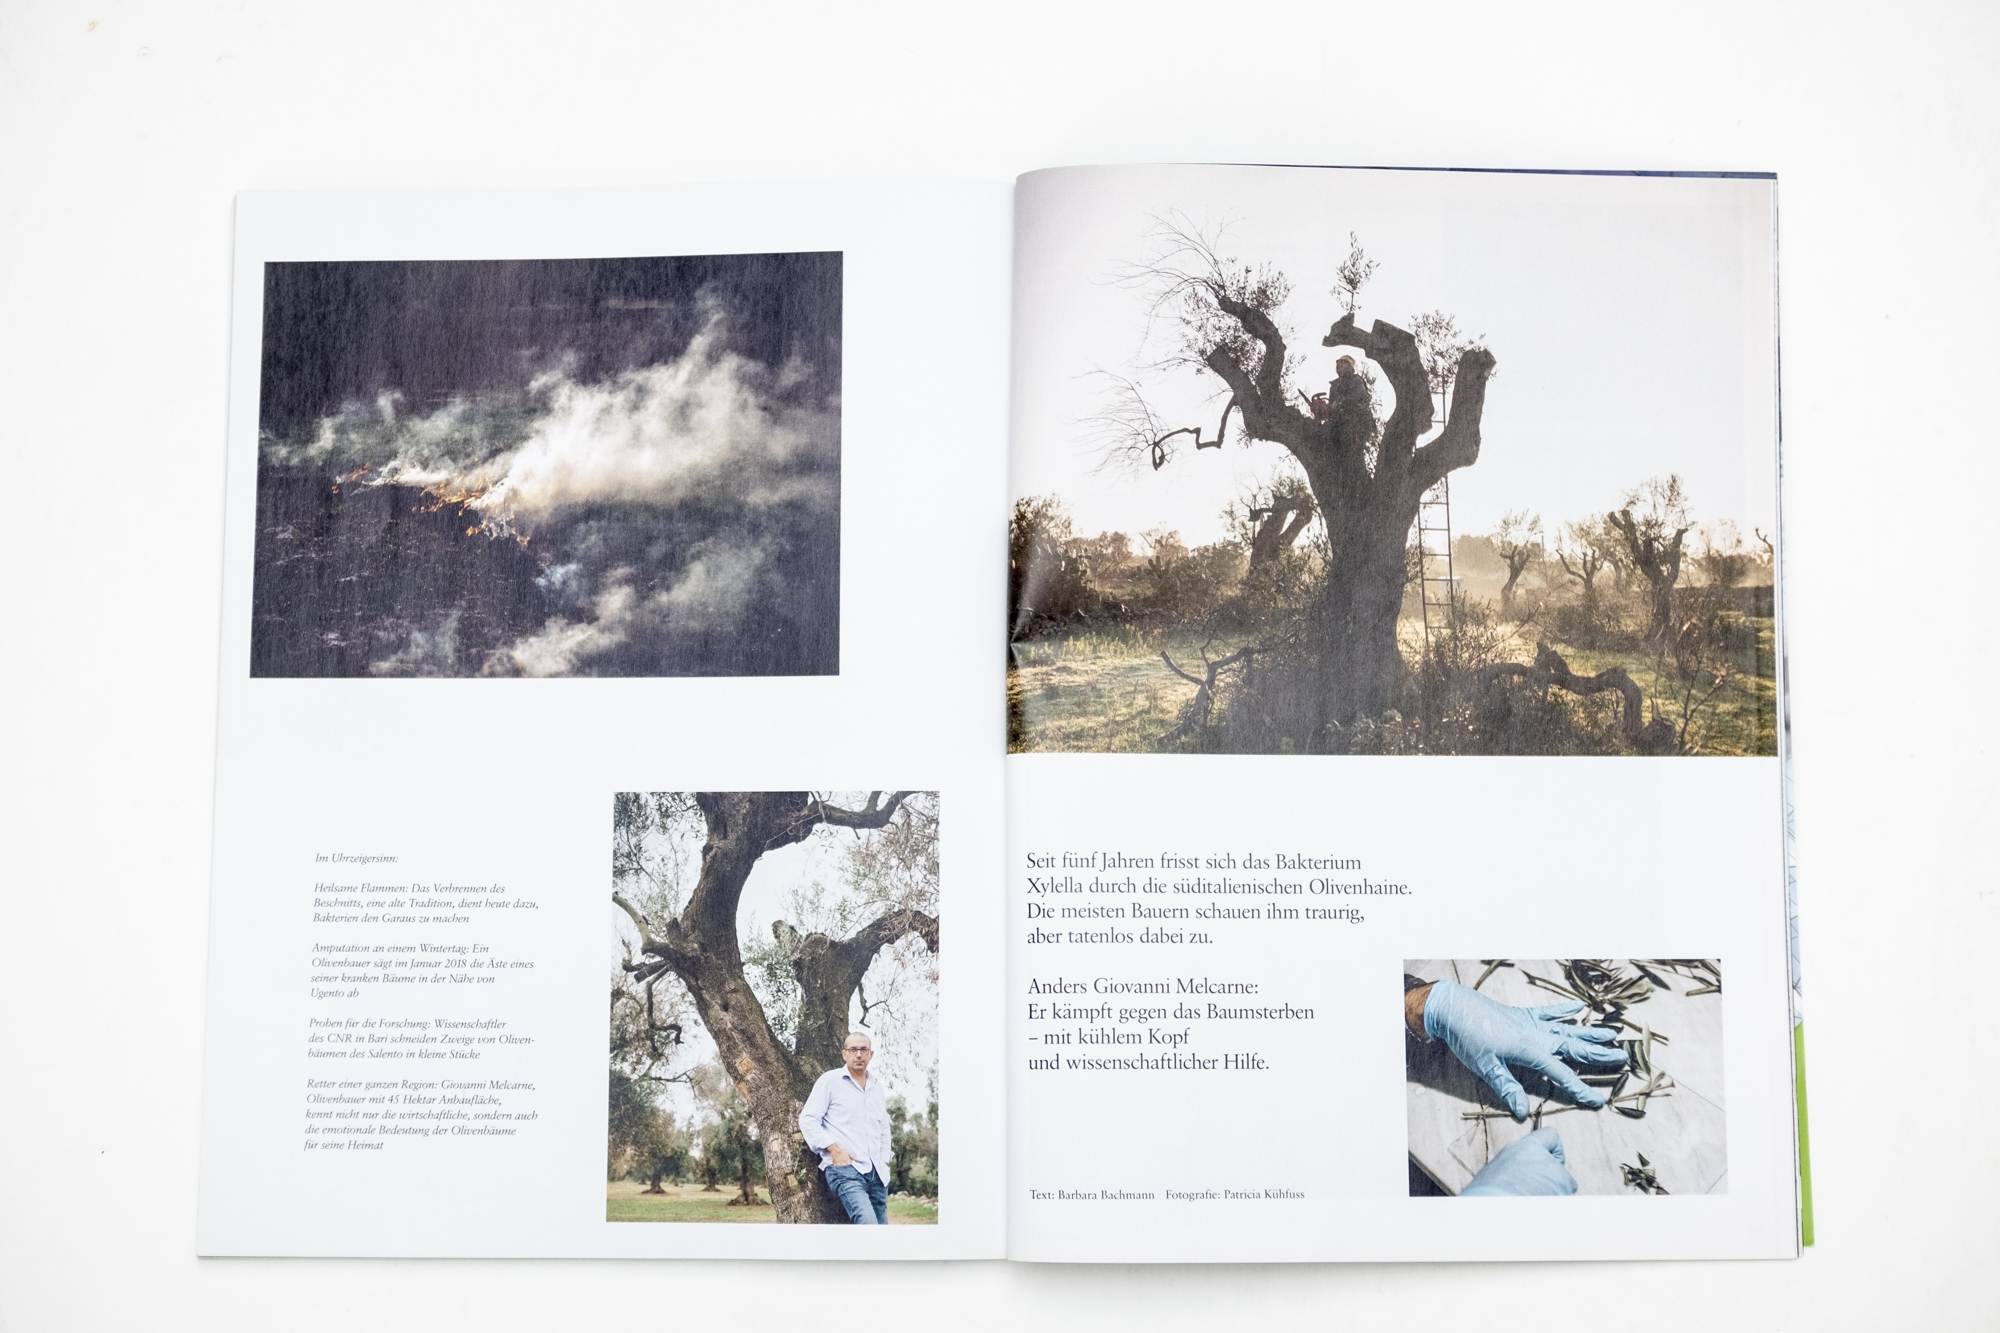 Magazine spread of publication "My father is in these trees" in brand eins magazine 06/2018